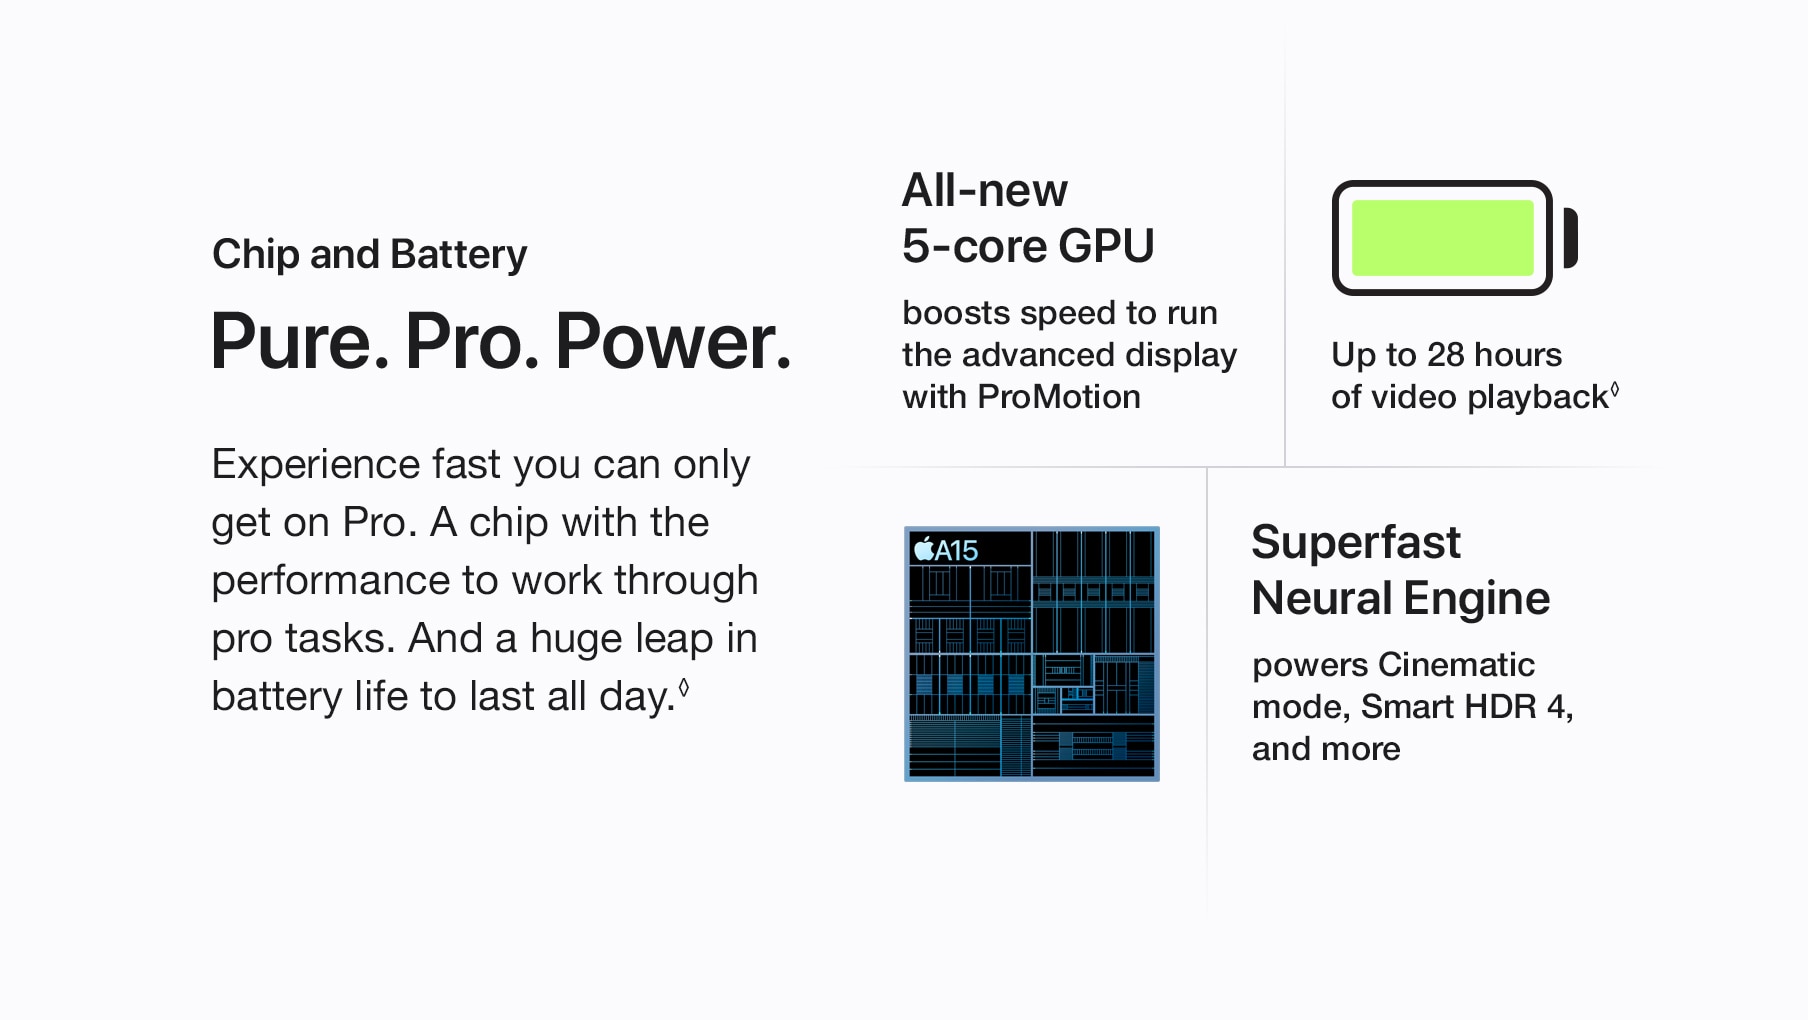 Chip and Battery. Pure. Pro. Power. Experience fast you can only get on Pro. A chip with the performance to work through pro tasks. And a huge leap in battery life to last all day.